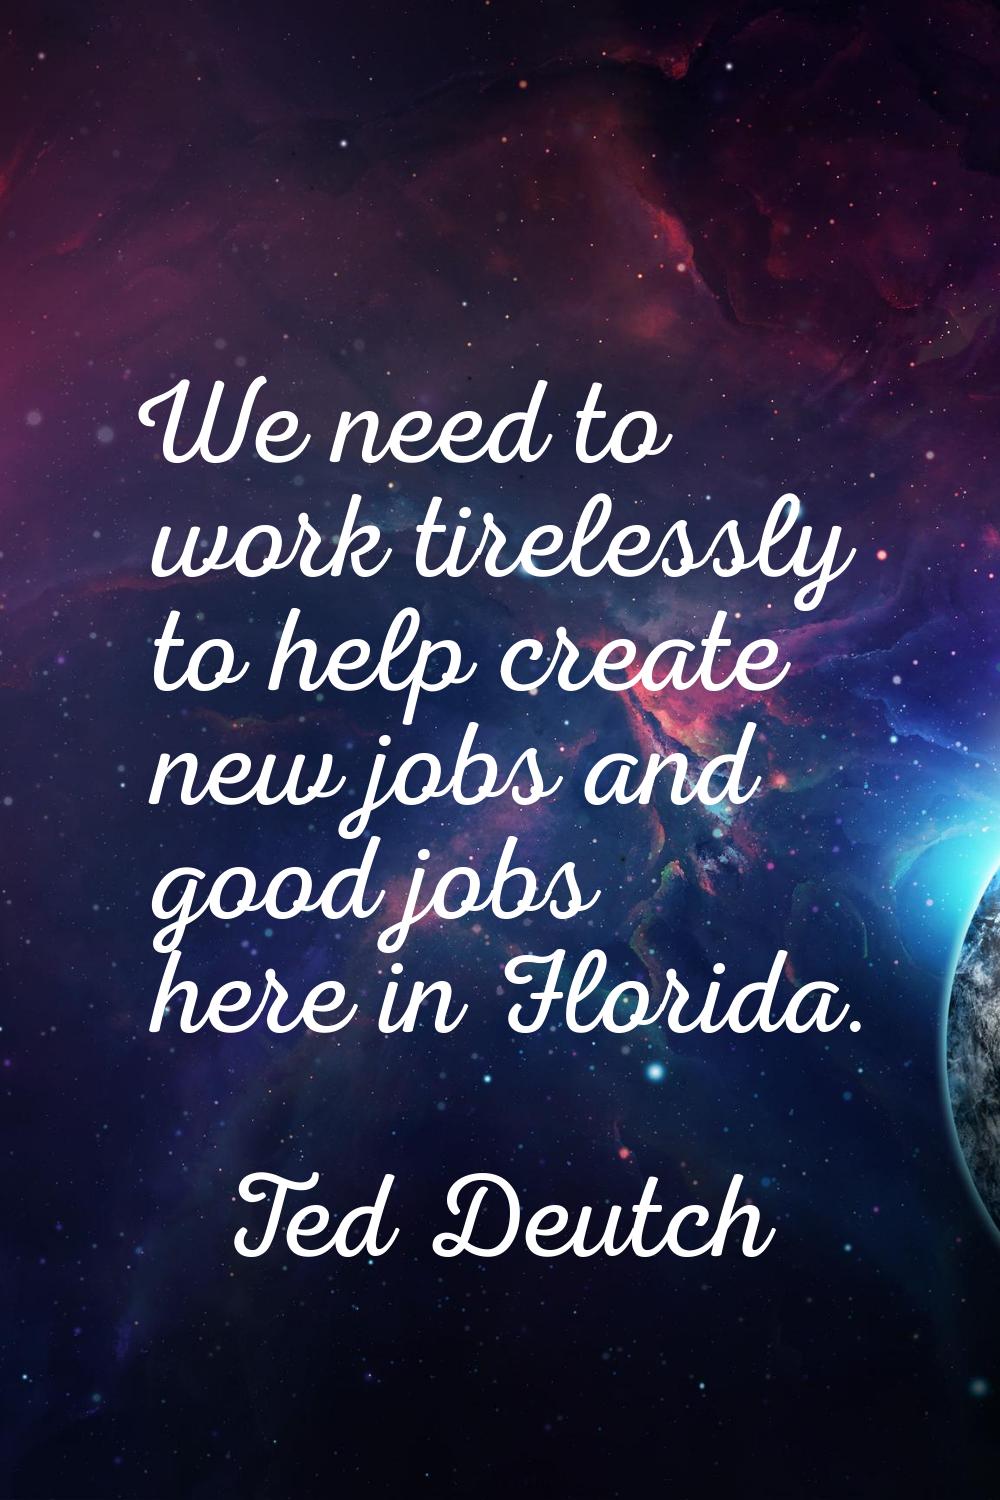 We need to work tirelessly to help create new jobs and good jobs here in Florida.